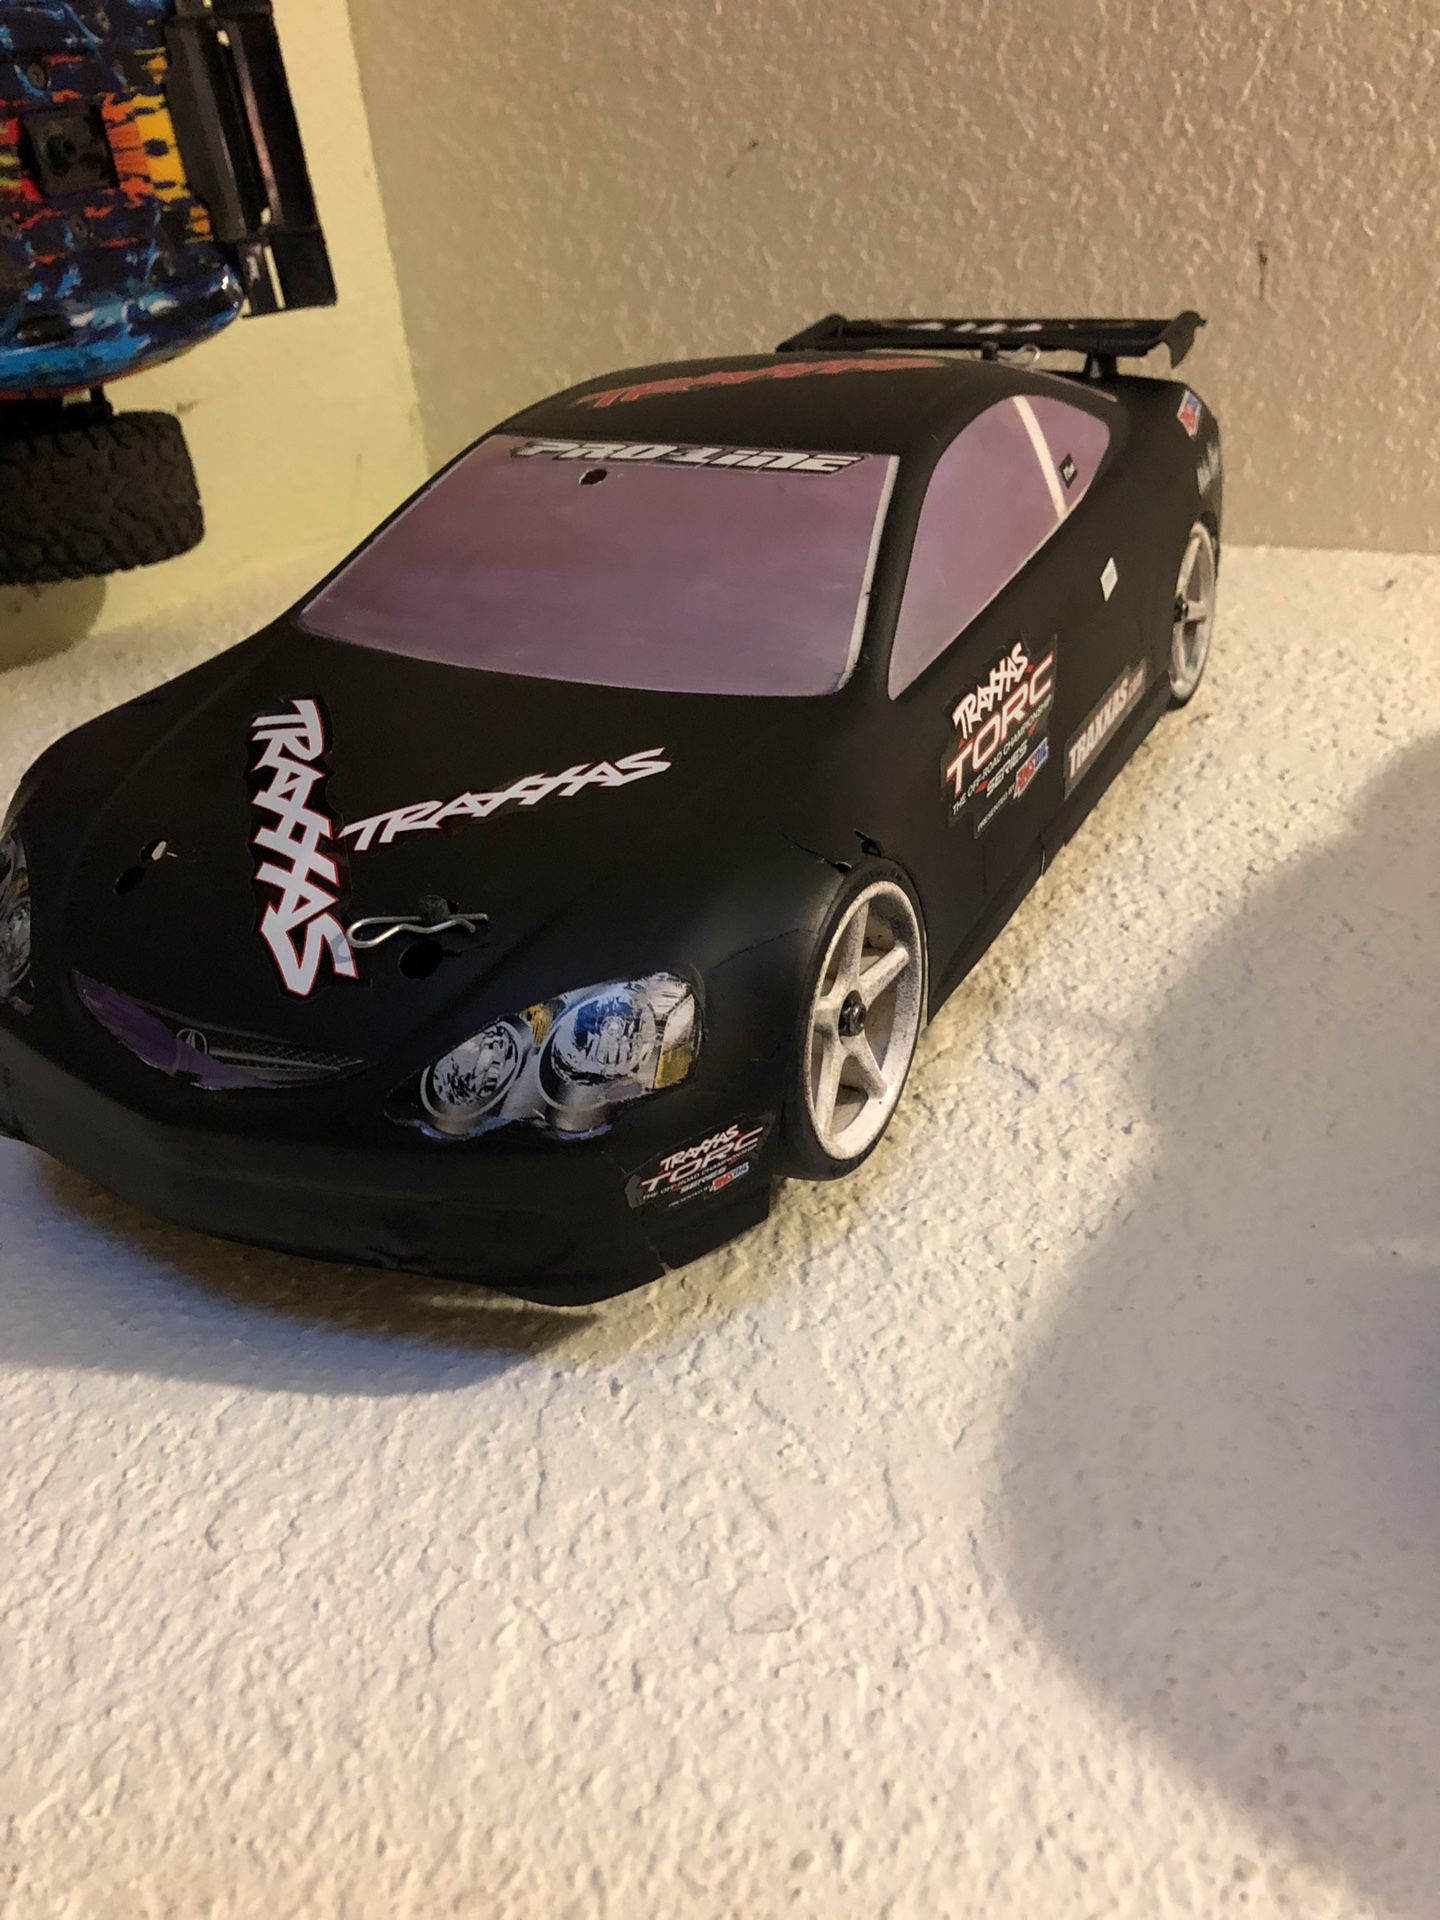 Trade 4 rc cars 3 traxxas. and 1 hpi drift trade for xmaxx